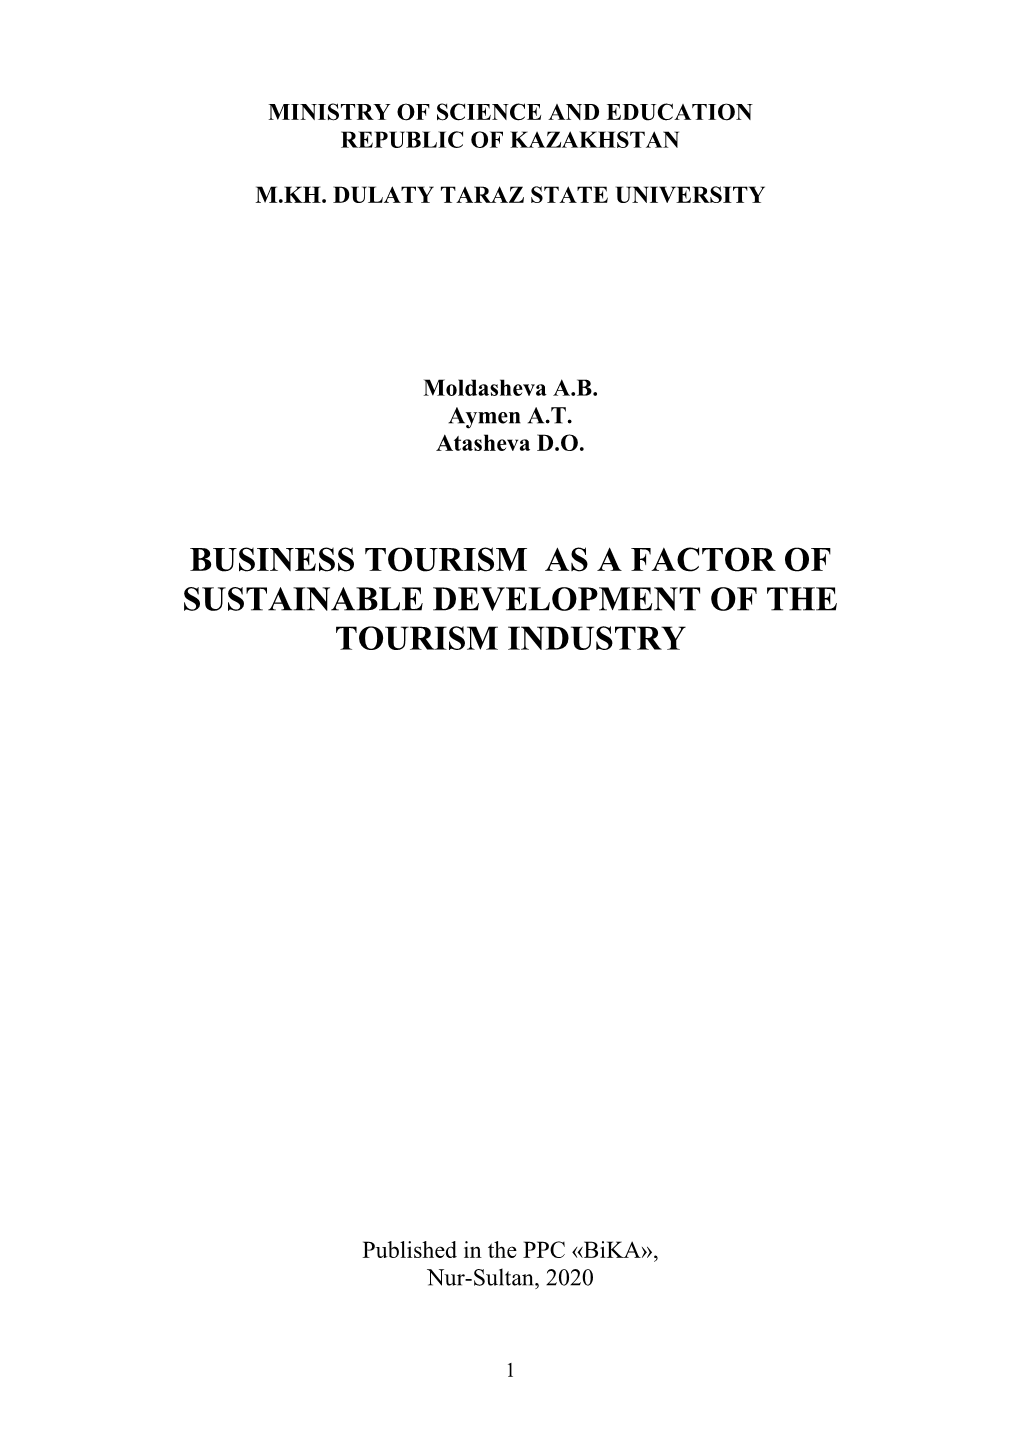 Business Tourism As a Factor of Sustainable Development of the Tourism Industry